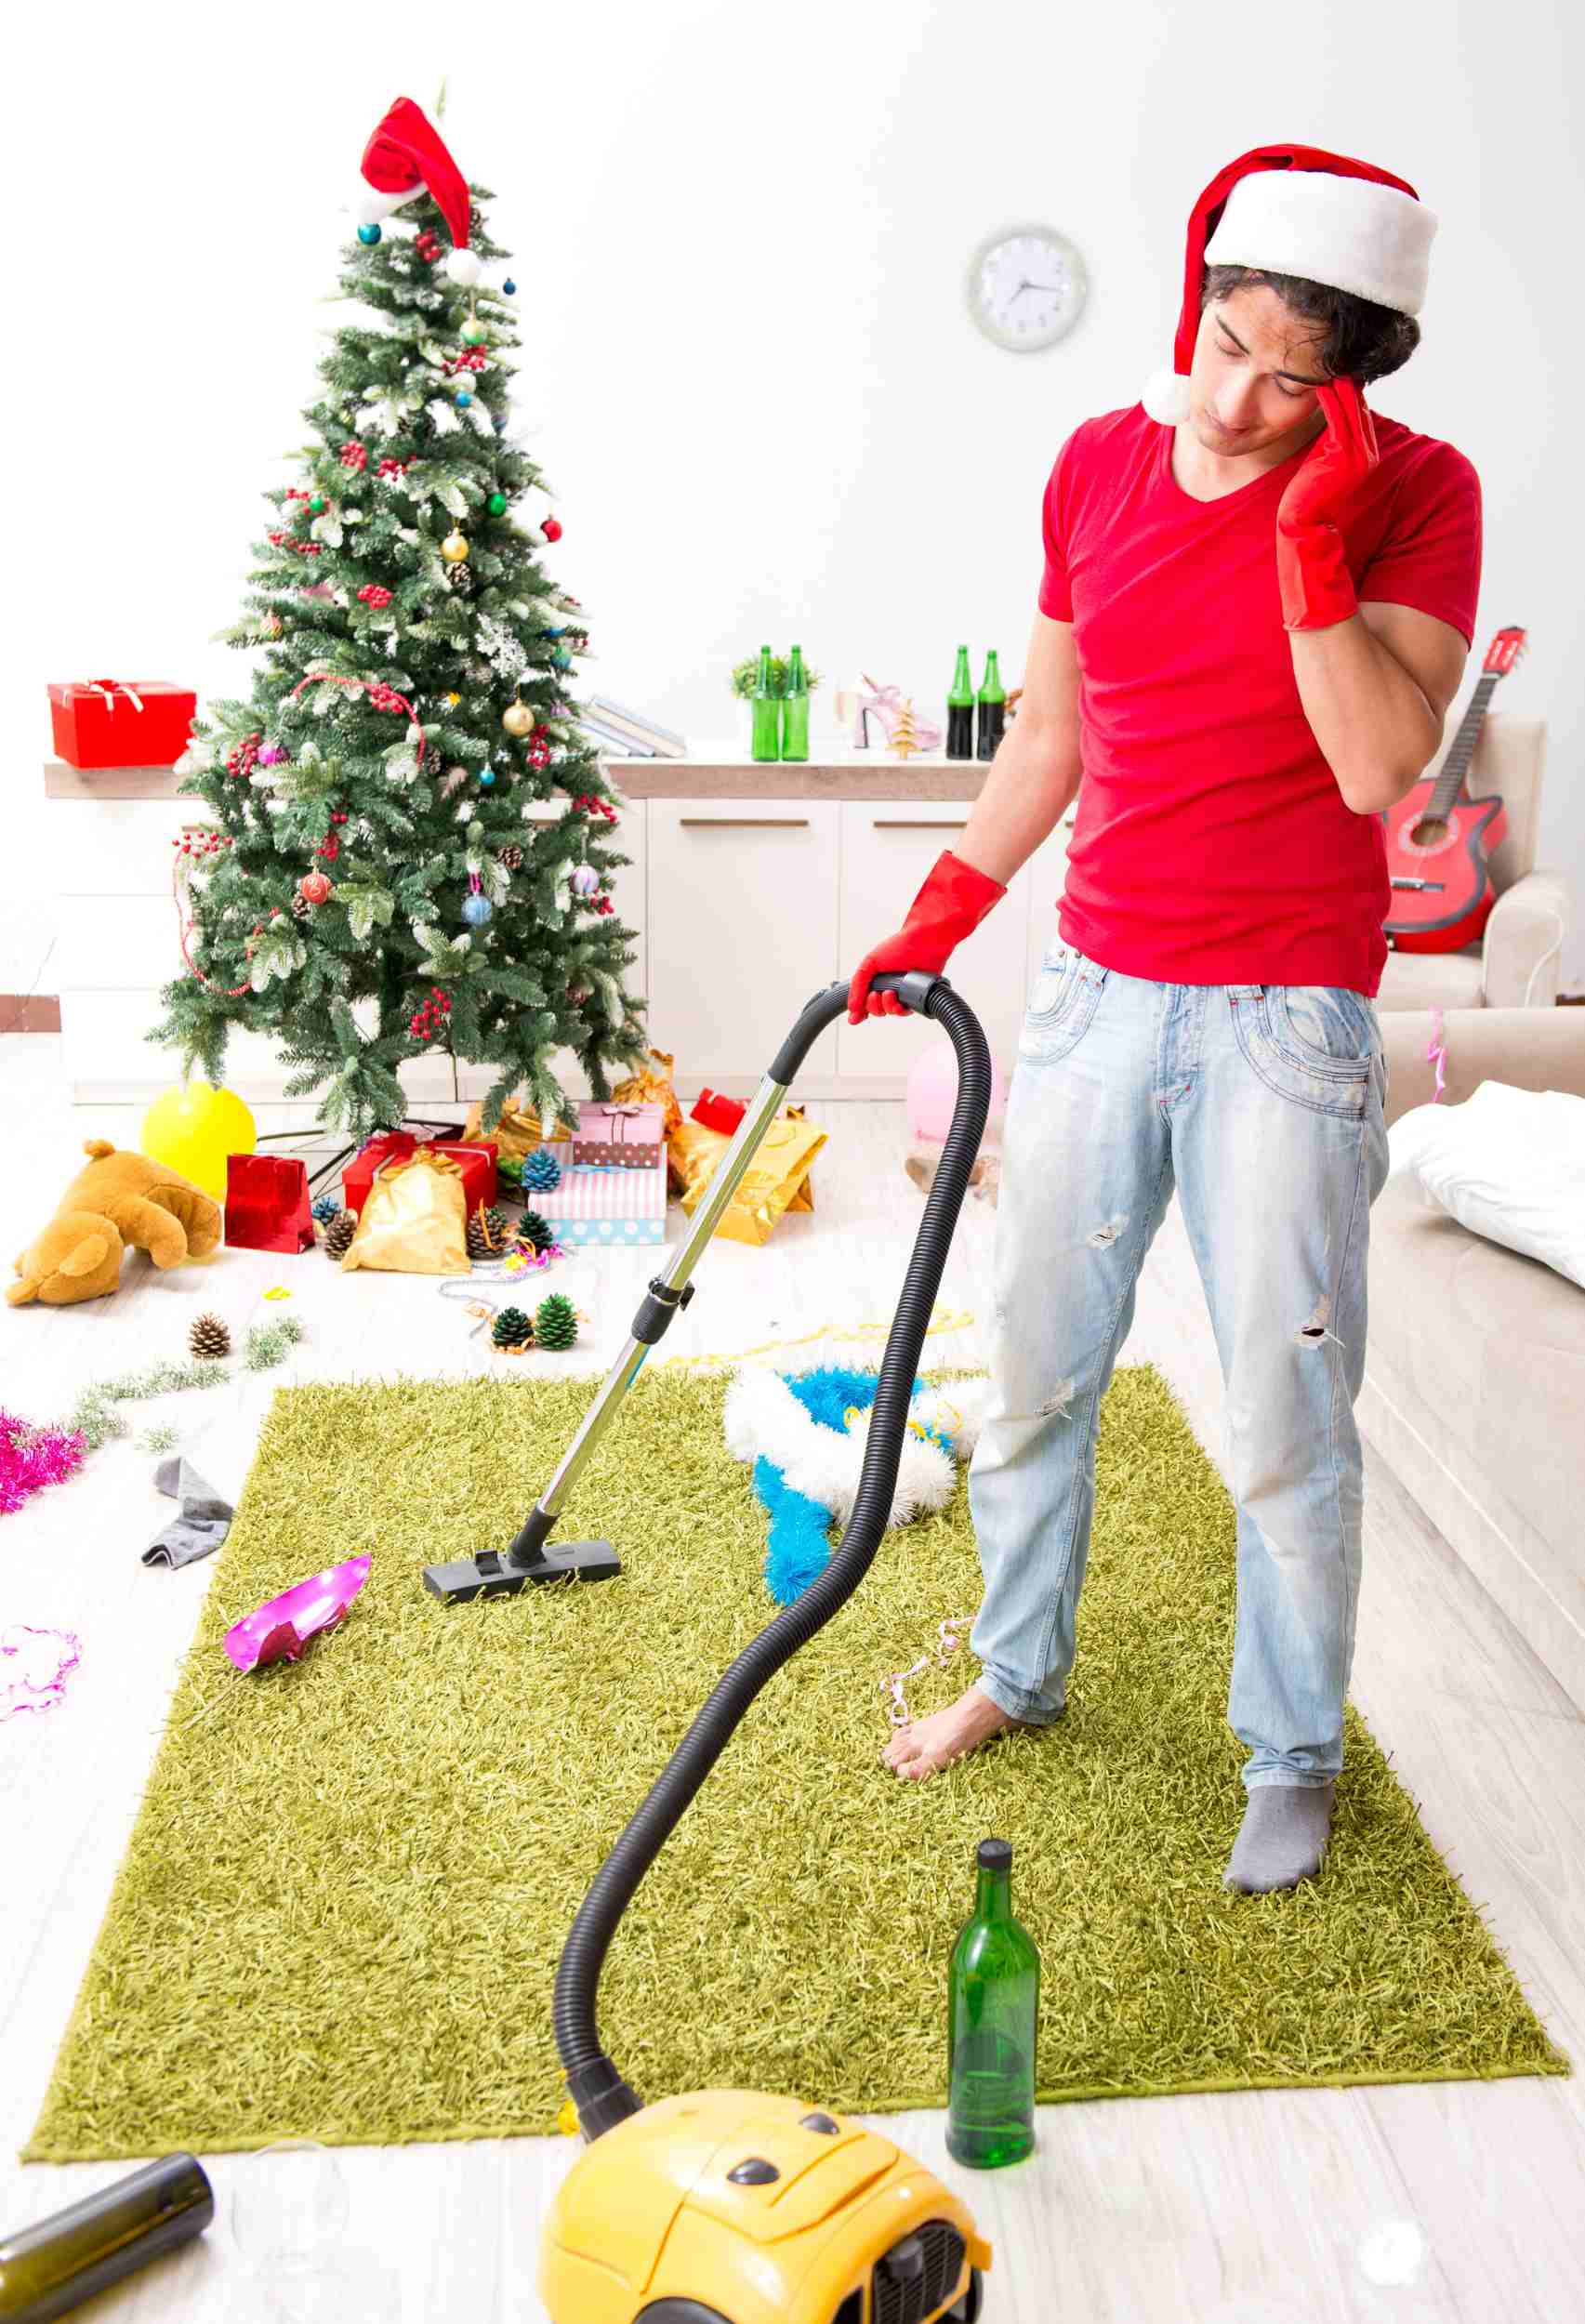 The ultimate festive season clean-up guide for beautiful homes